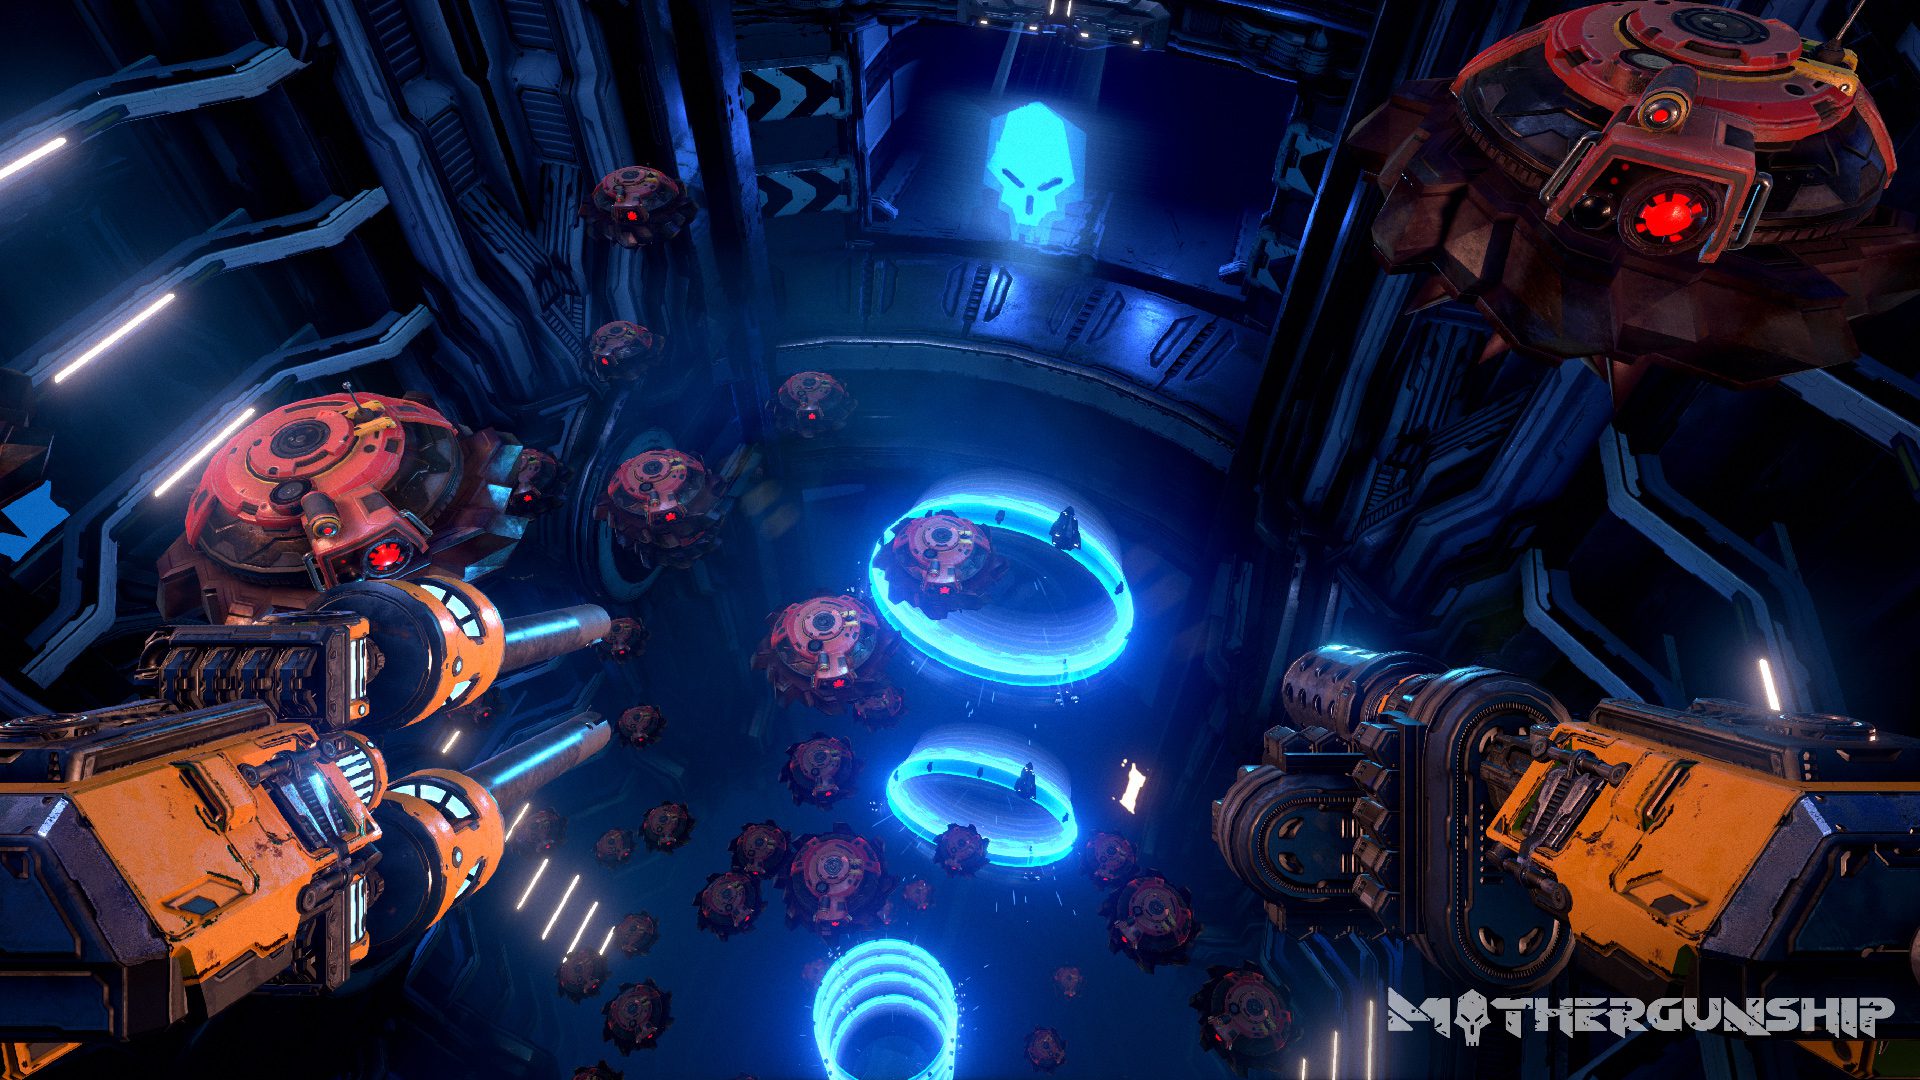 The Bullet Ballet begins as MOTHERGUNSHIP launches this July